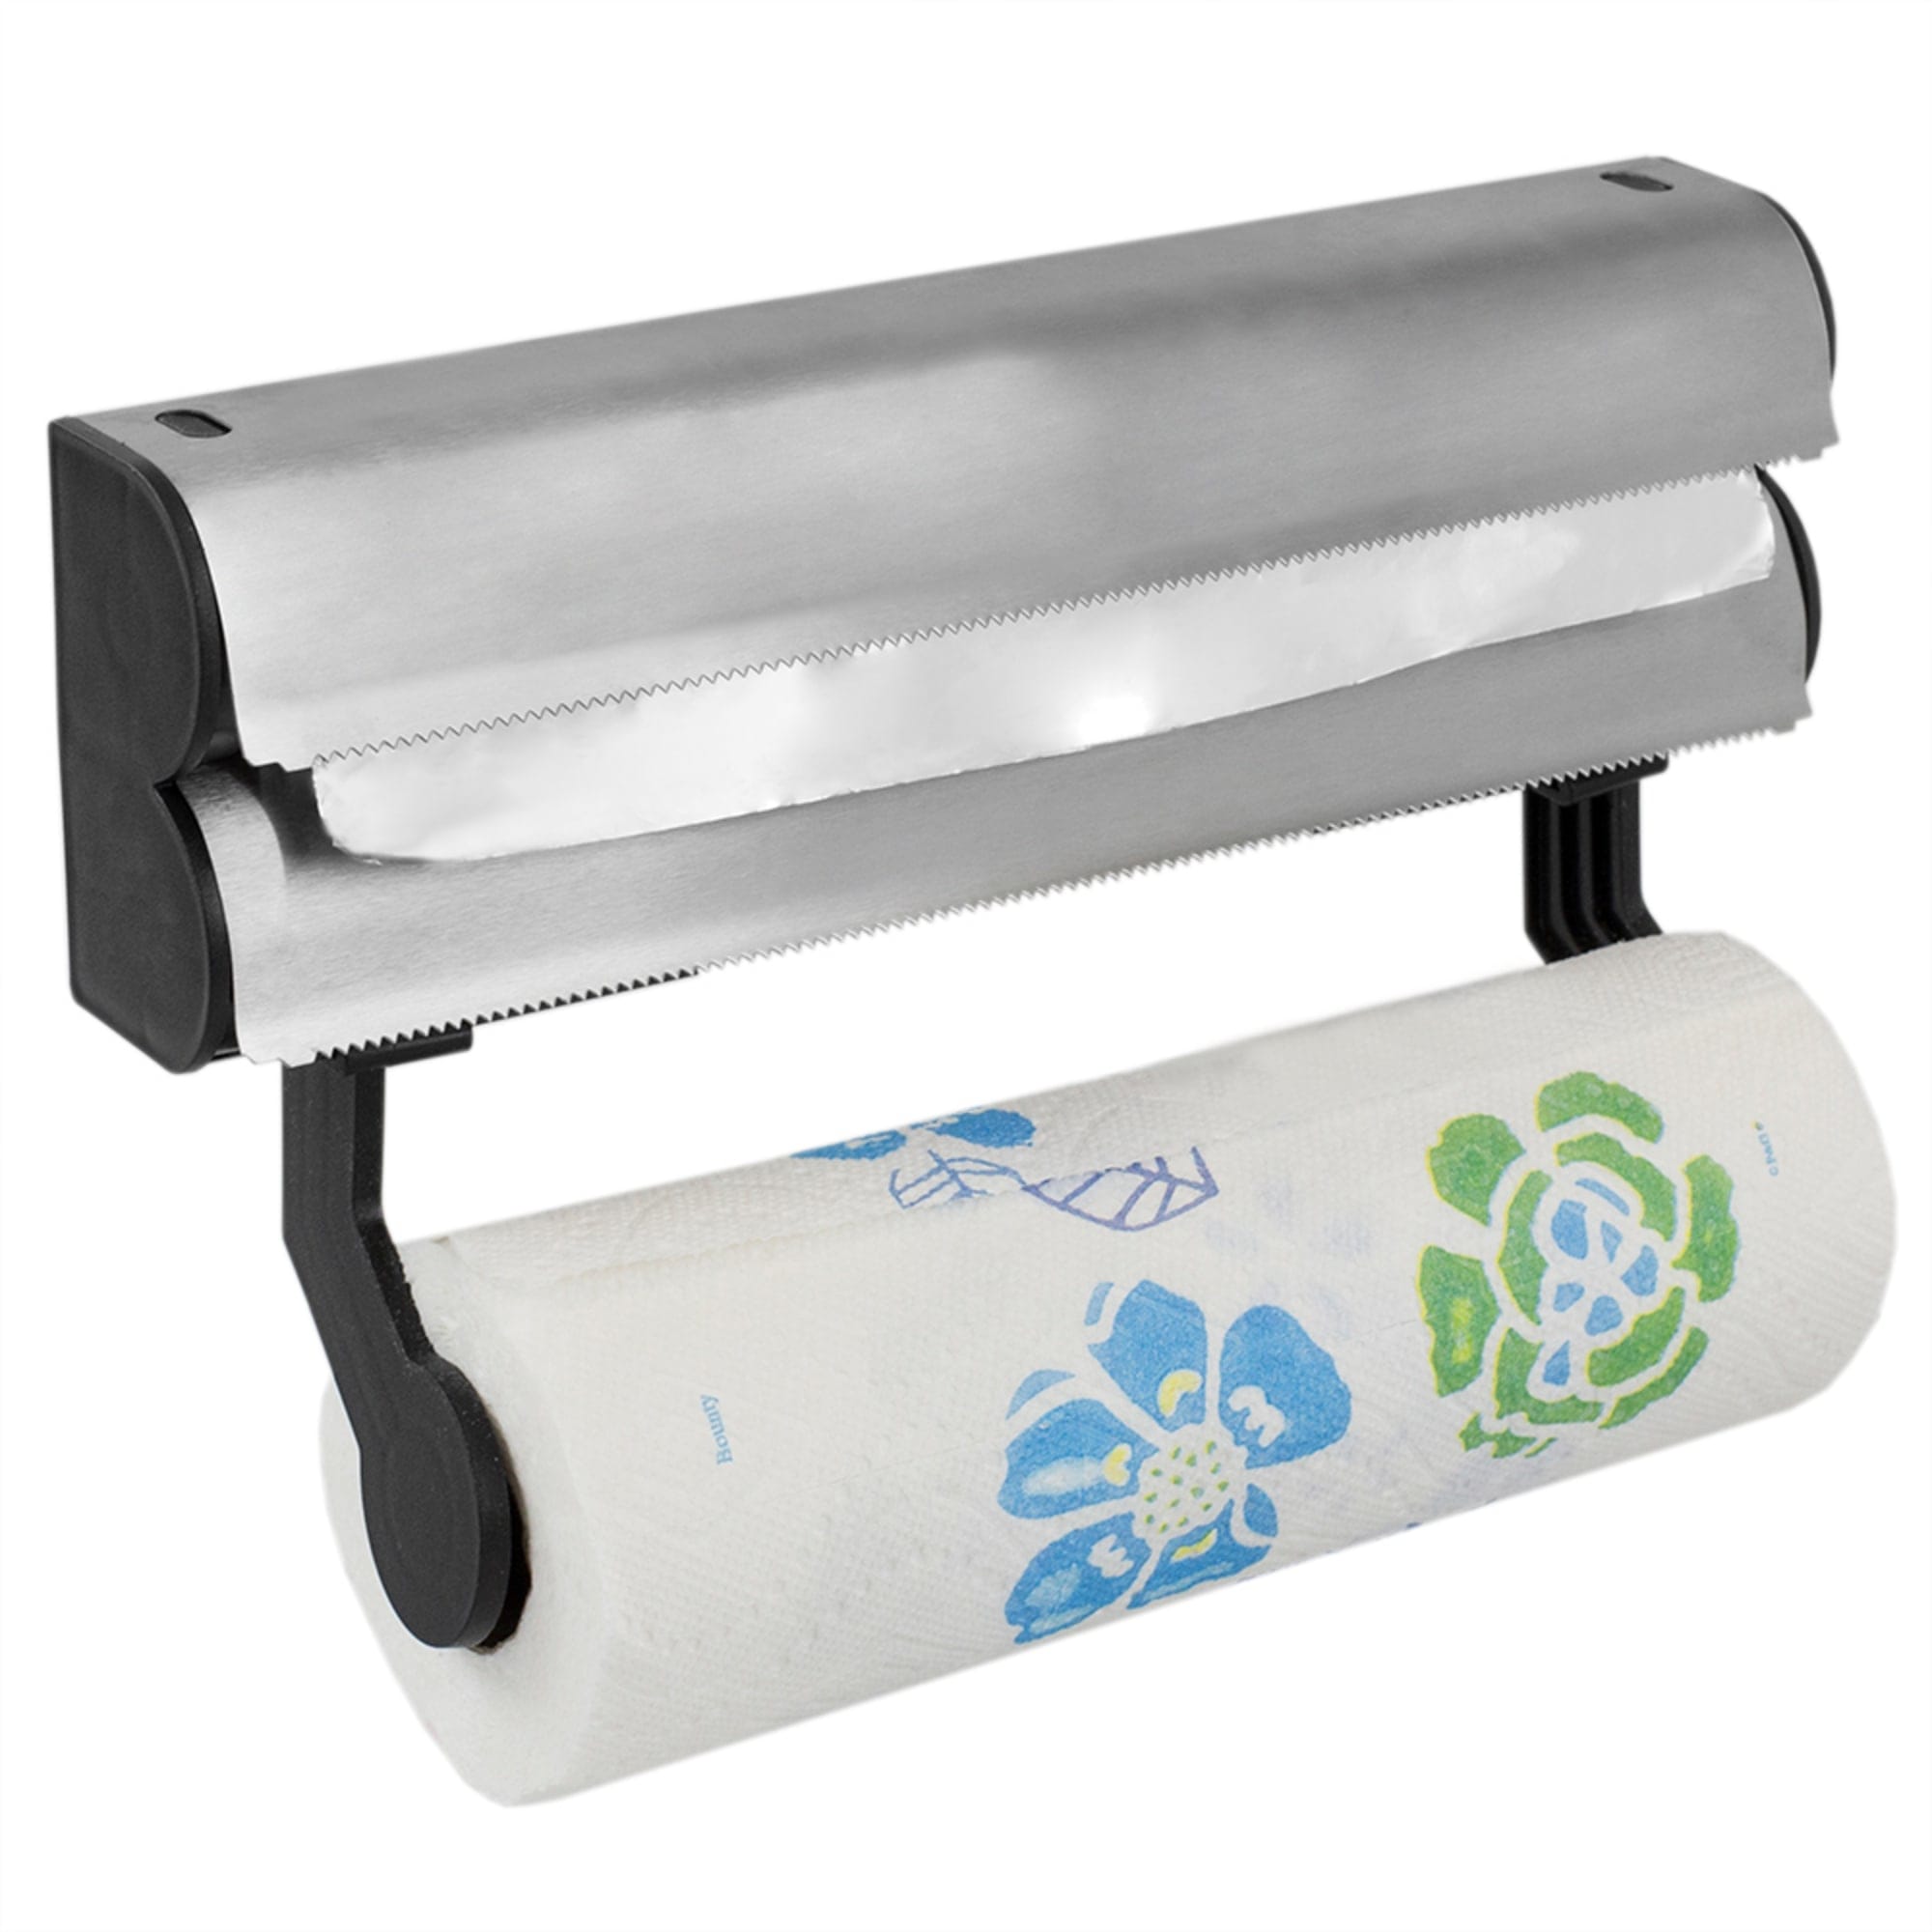 Stainless Steel Paper Towel Holder